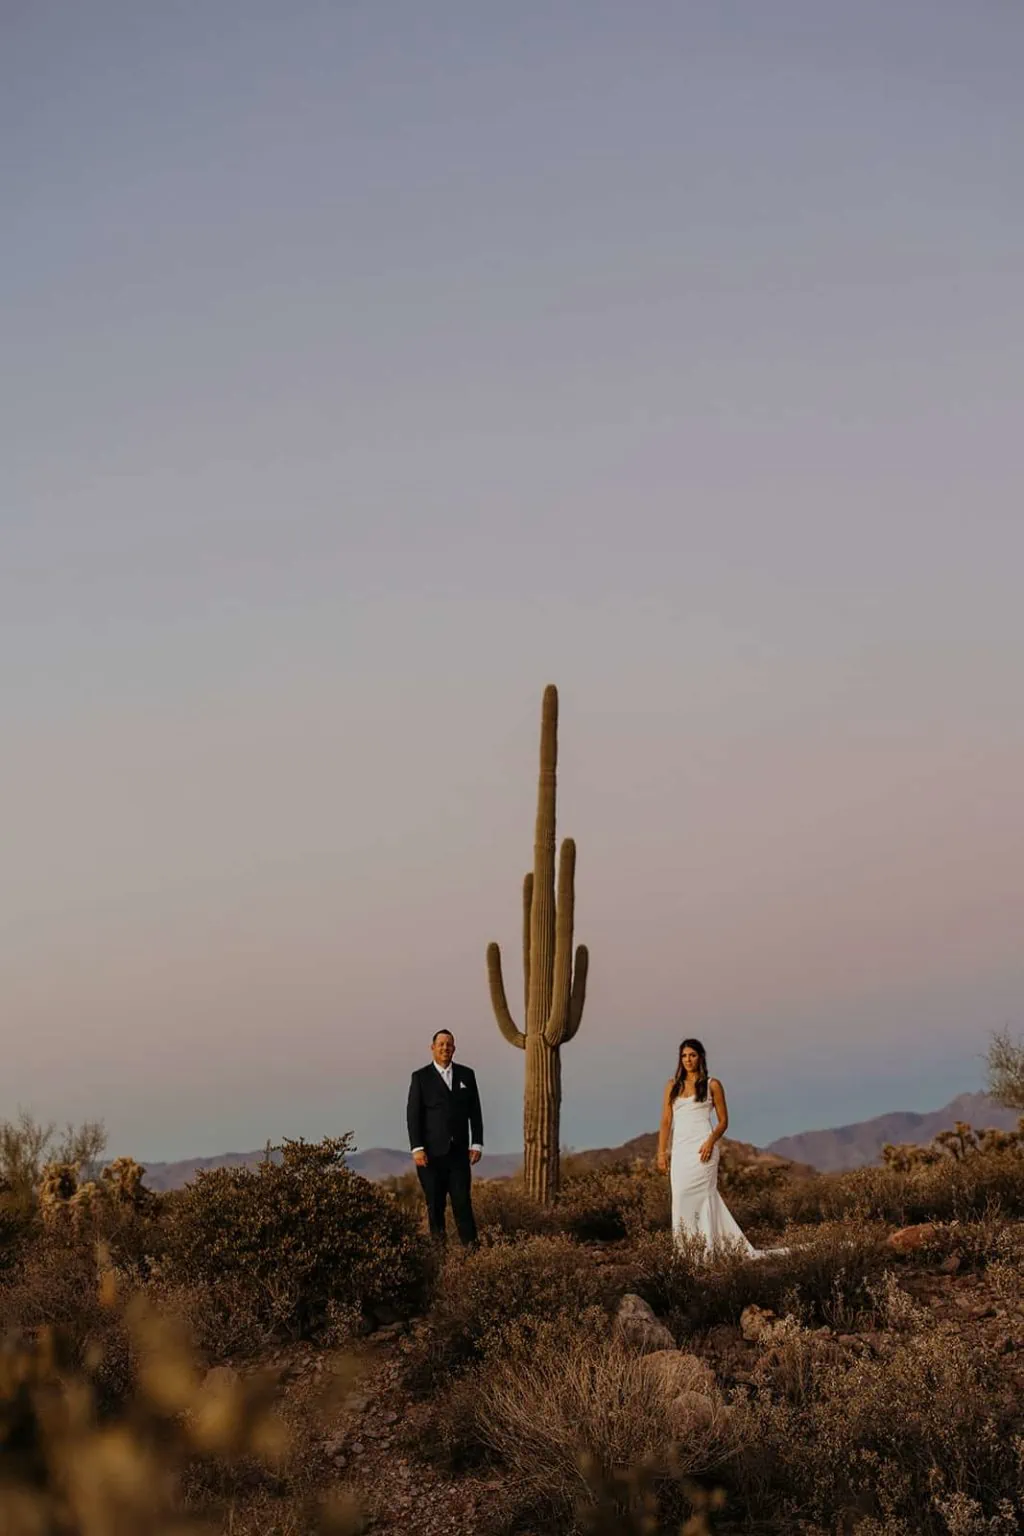 A couple stands together by a large cacti in the blue hour of the day.